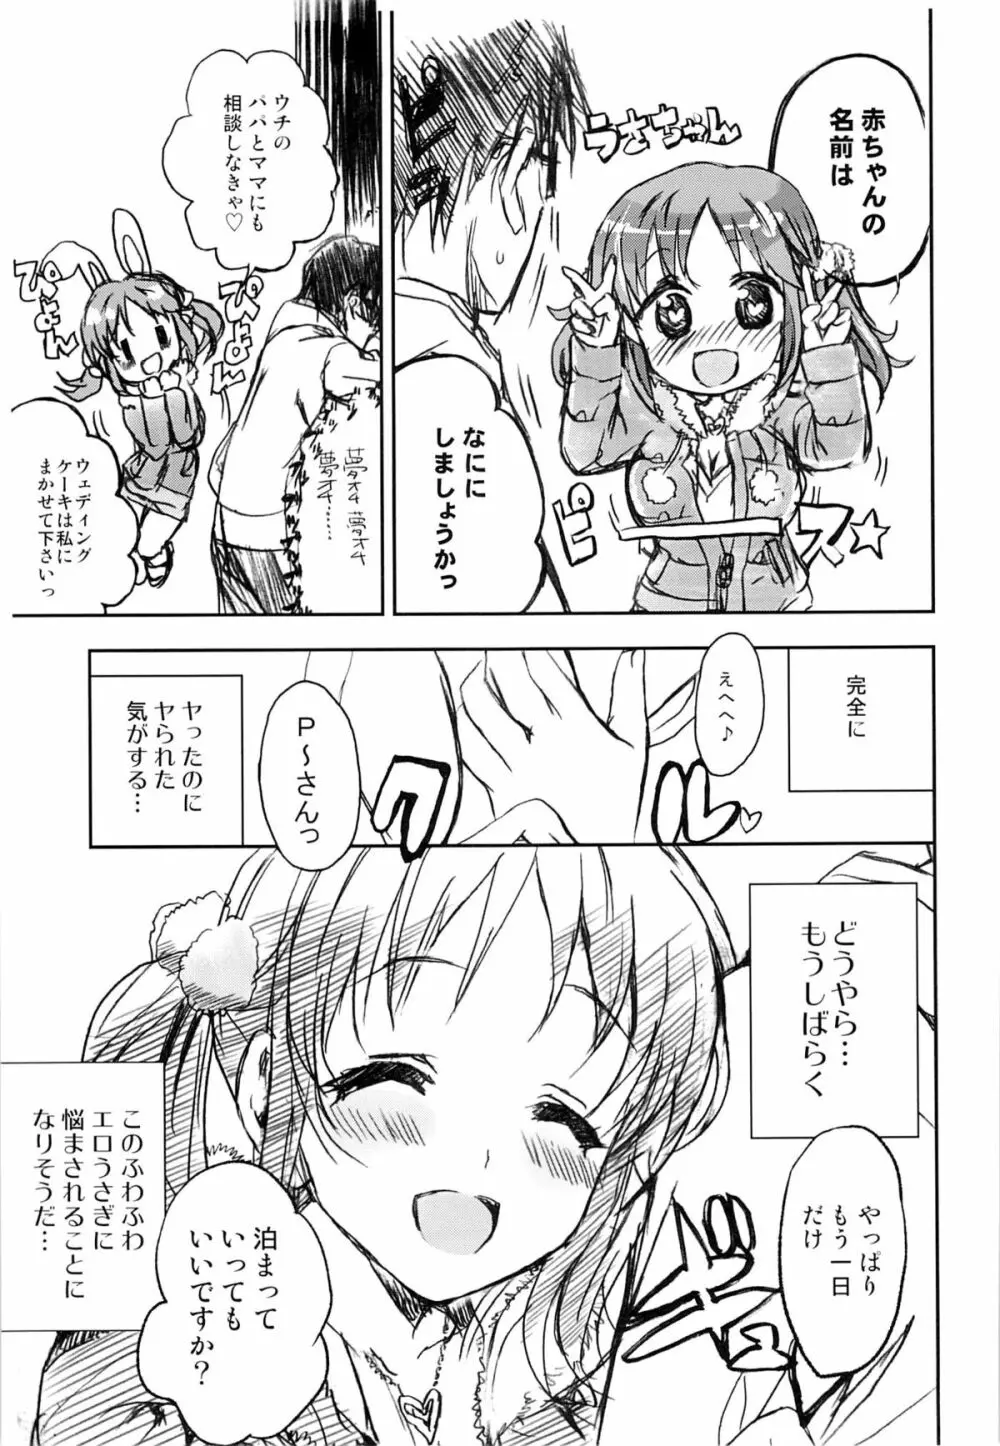 Passion Fruit Girls #十時愛梨 プリンセスバニーは眠らない。 Page.28